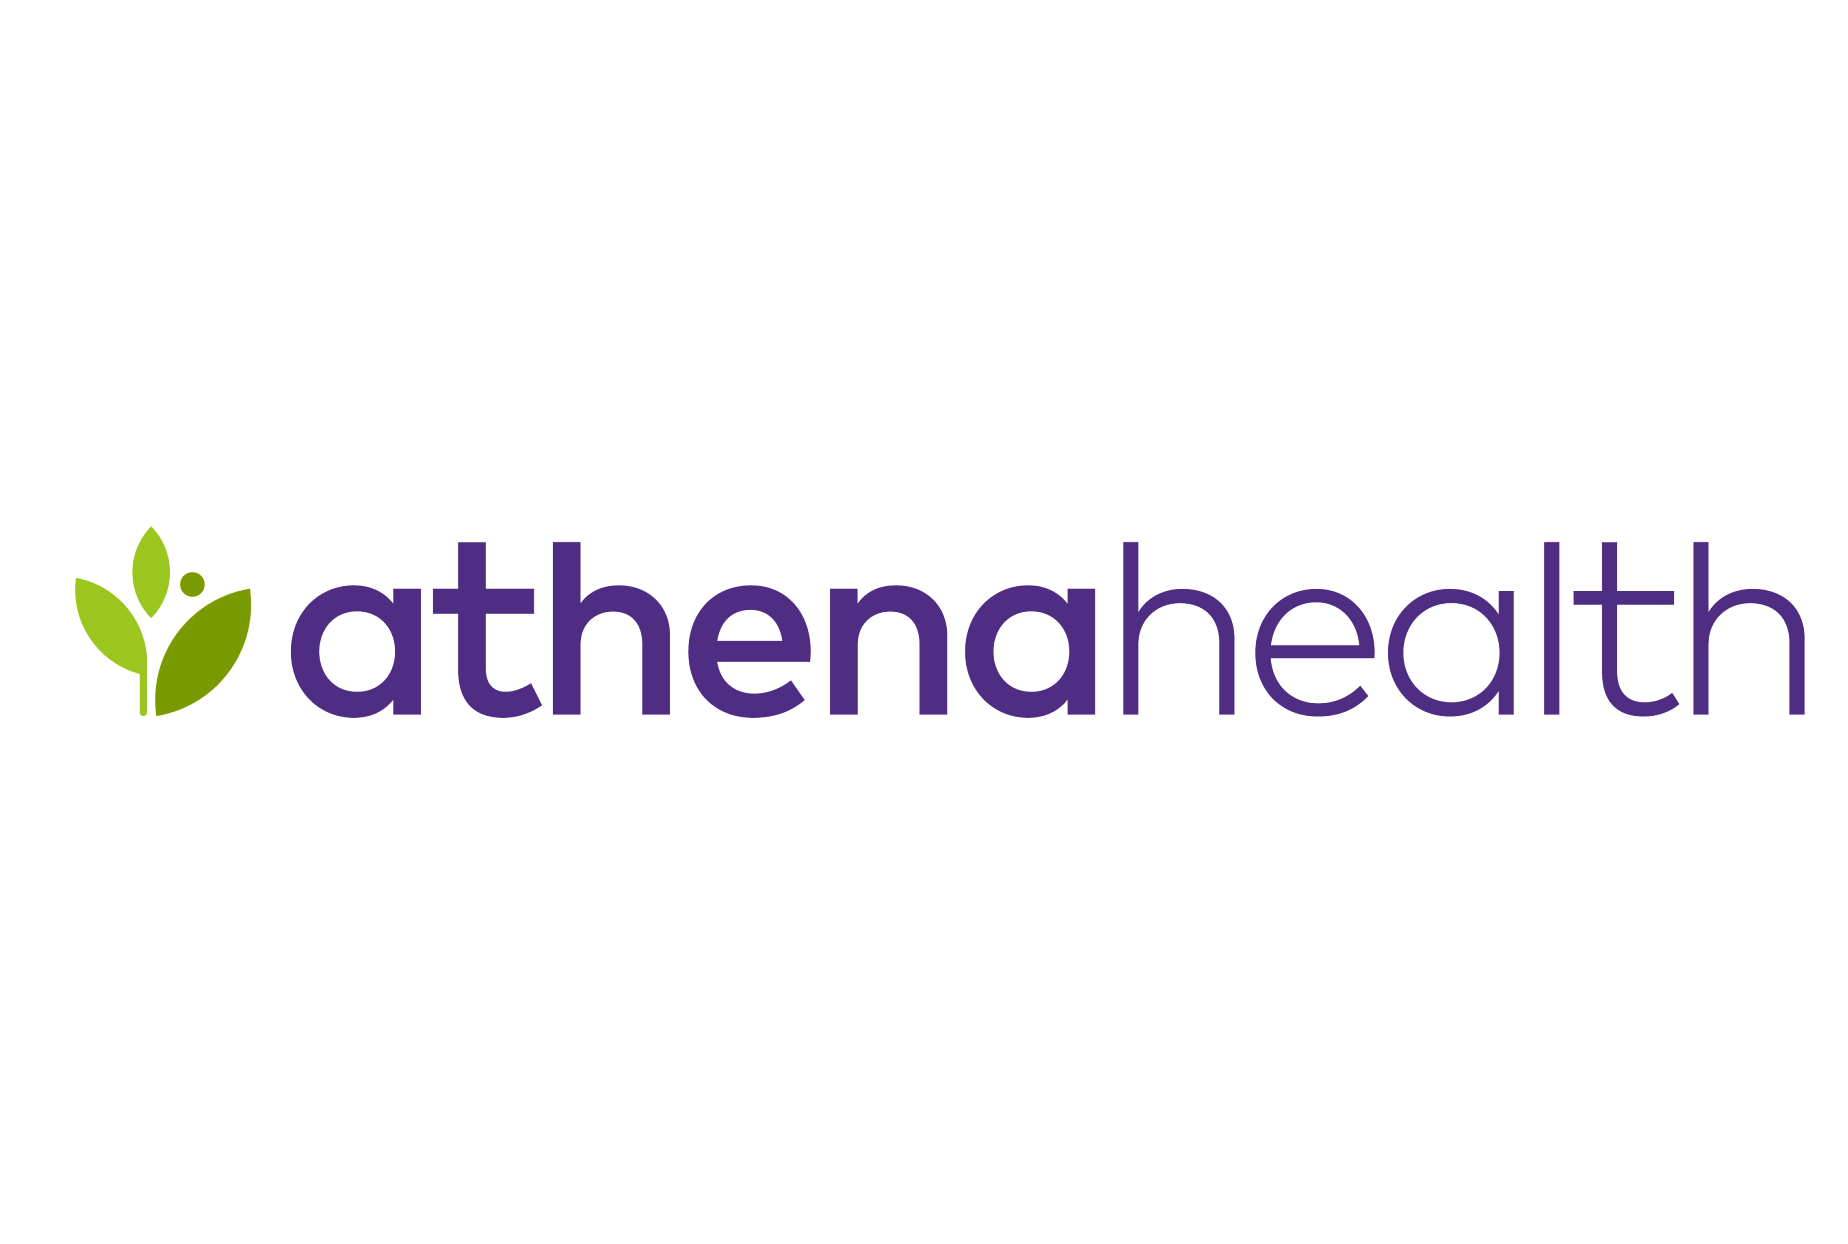 athenahealth, Healthcare Technology Leader, to be Acquired by Hellman & Friedman and Bain Capital for $17 Billion